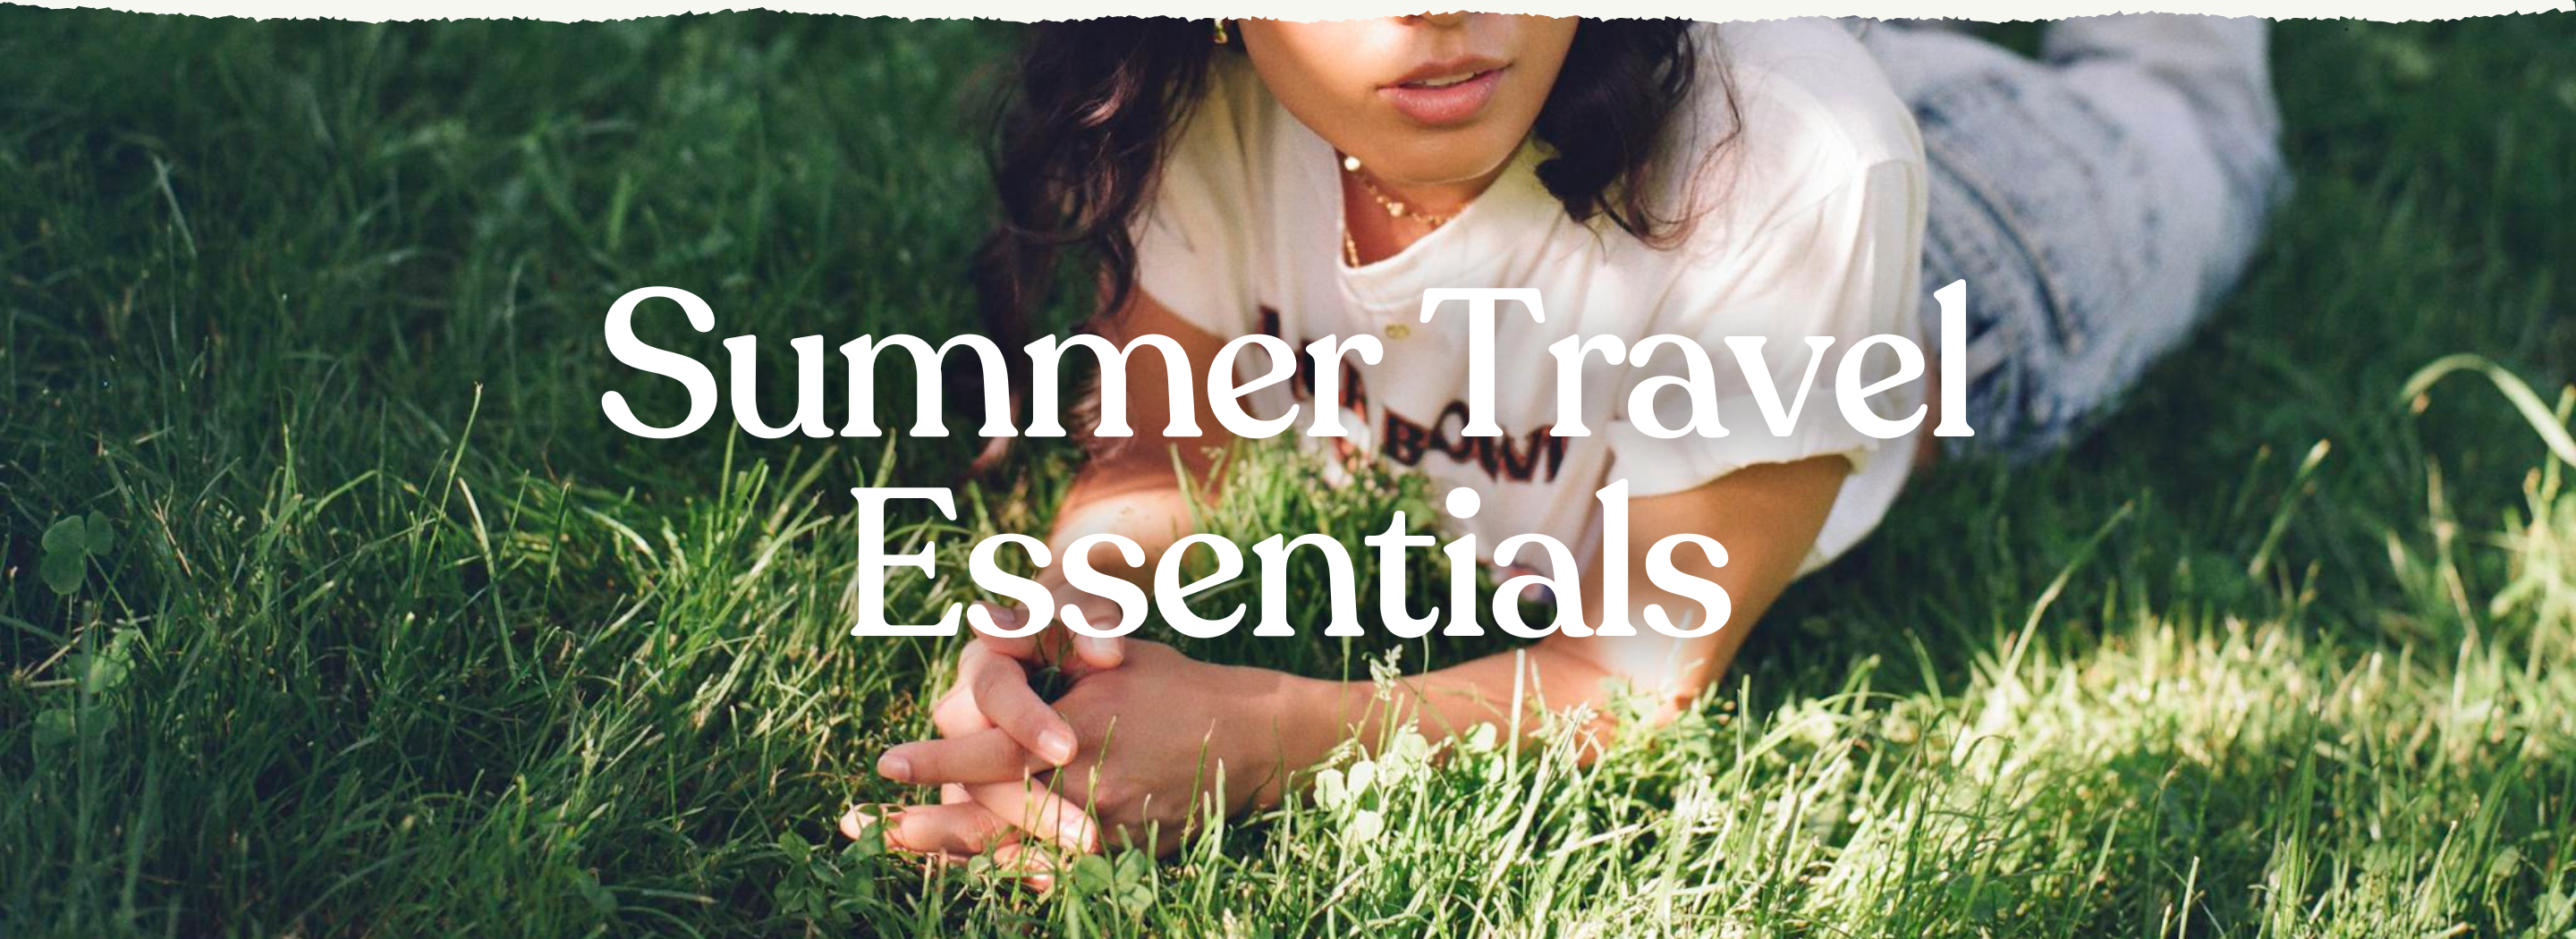 a woman in tshirts and jeans laying on the grass with caption: "Summer Travel Essentials"